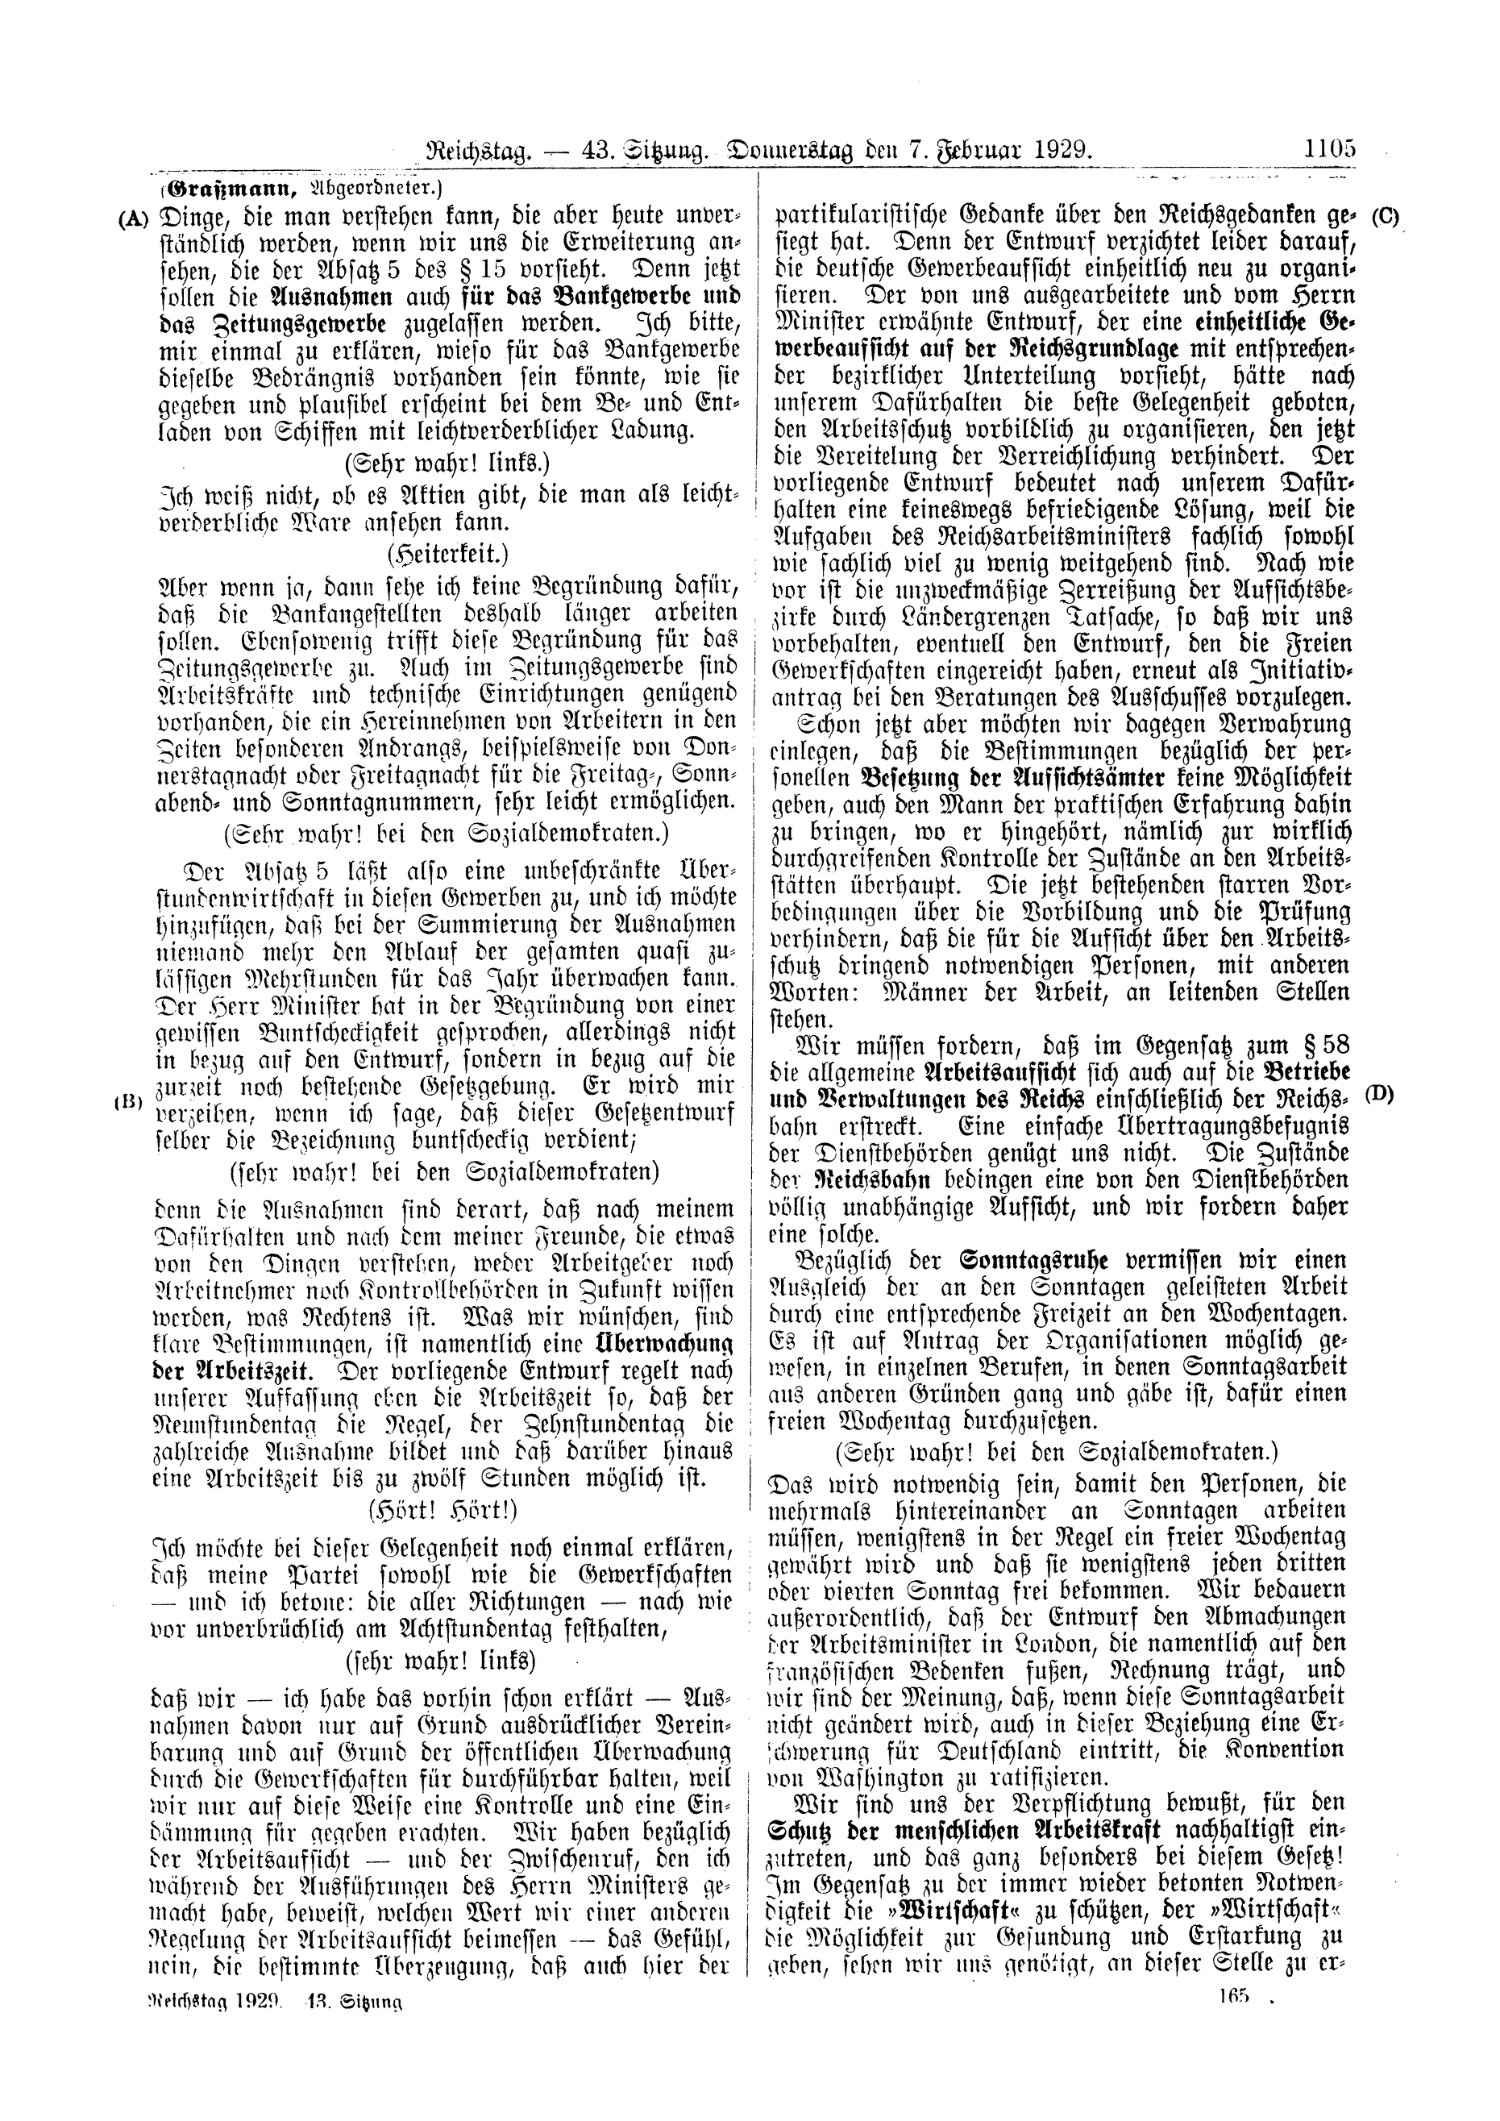 Scan of page 1105